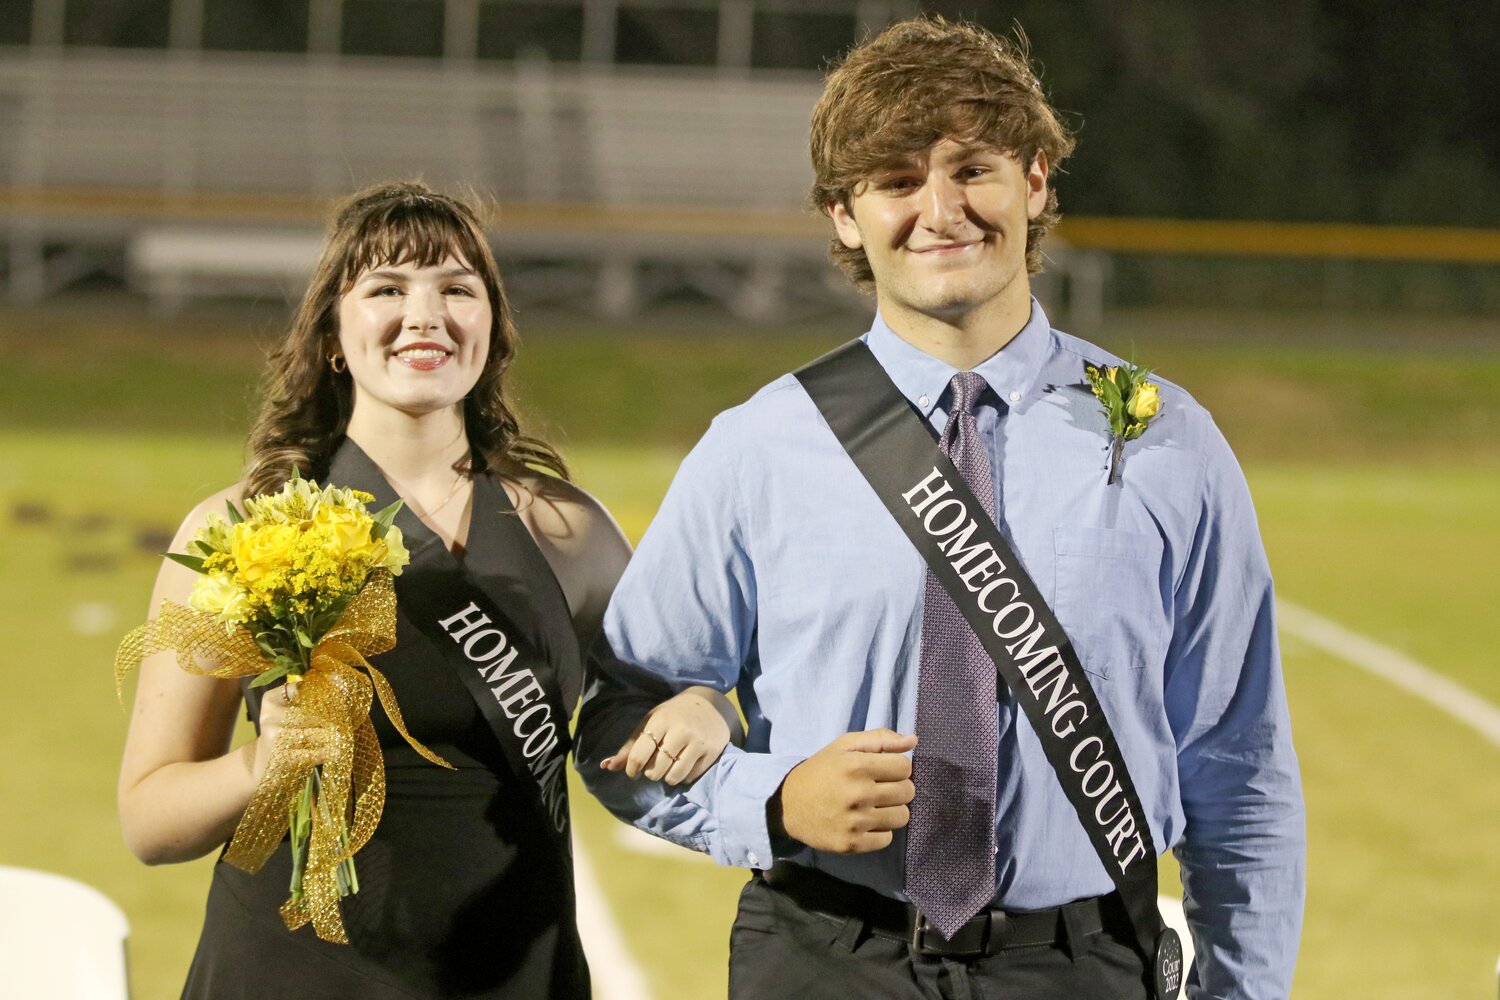 Homecoming court nominees Avery Slaubaugh and Jack Greiner.